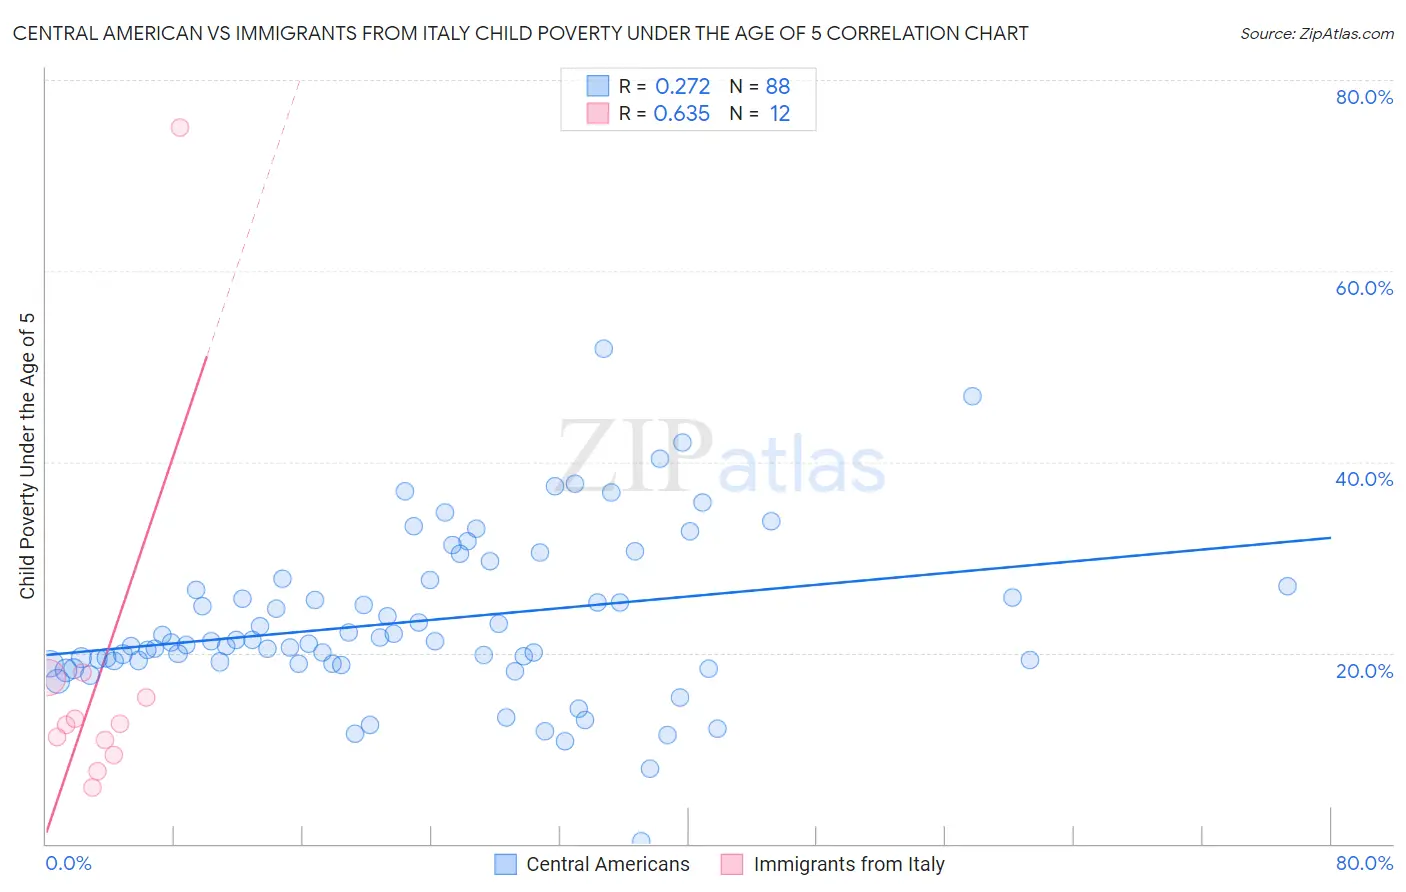 Central American vs Immigrants from Italy Child Poverty Under the Age of 5